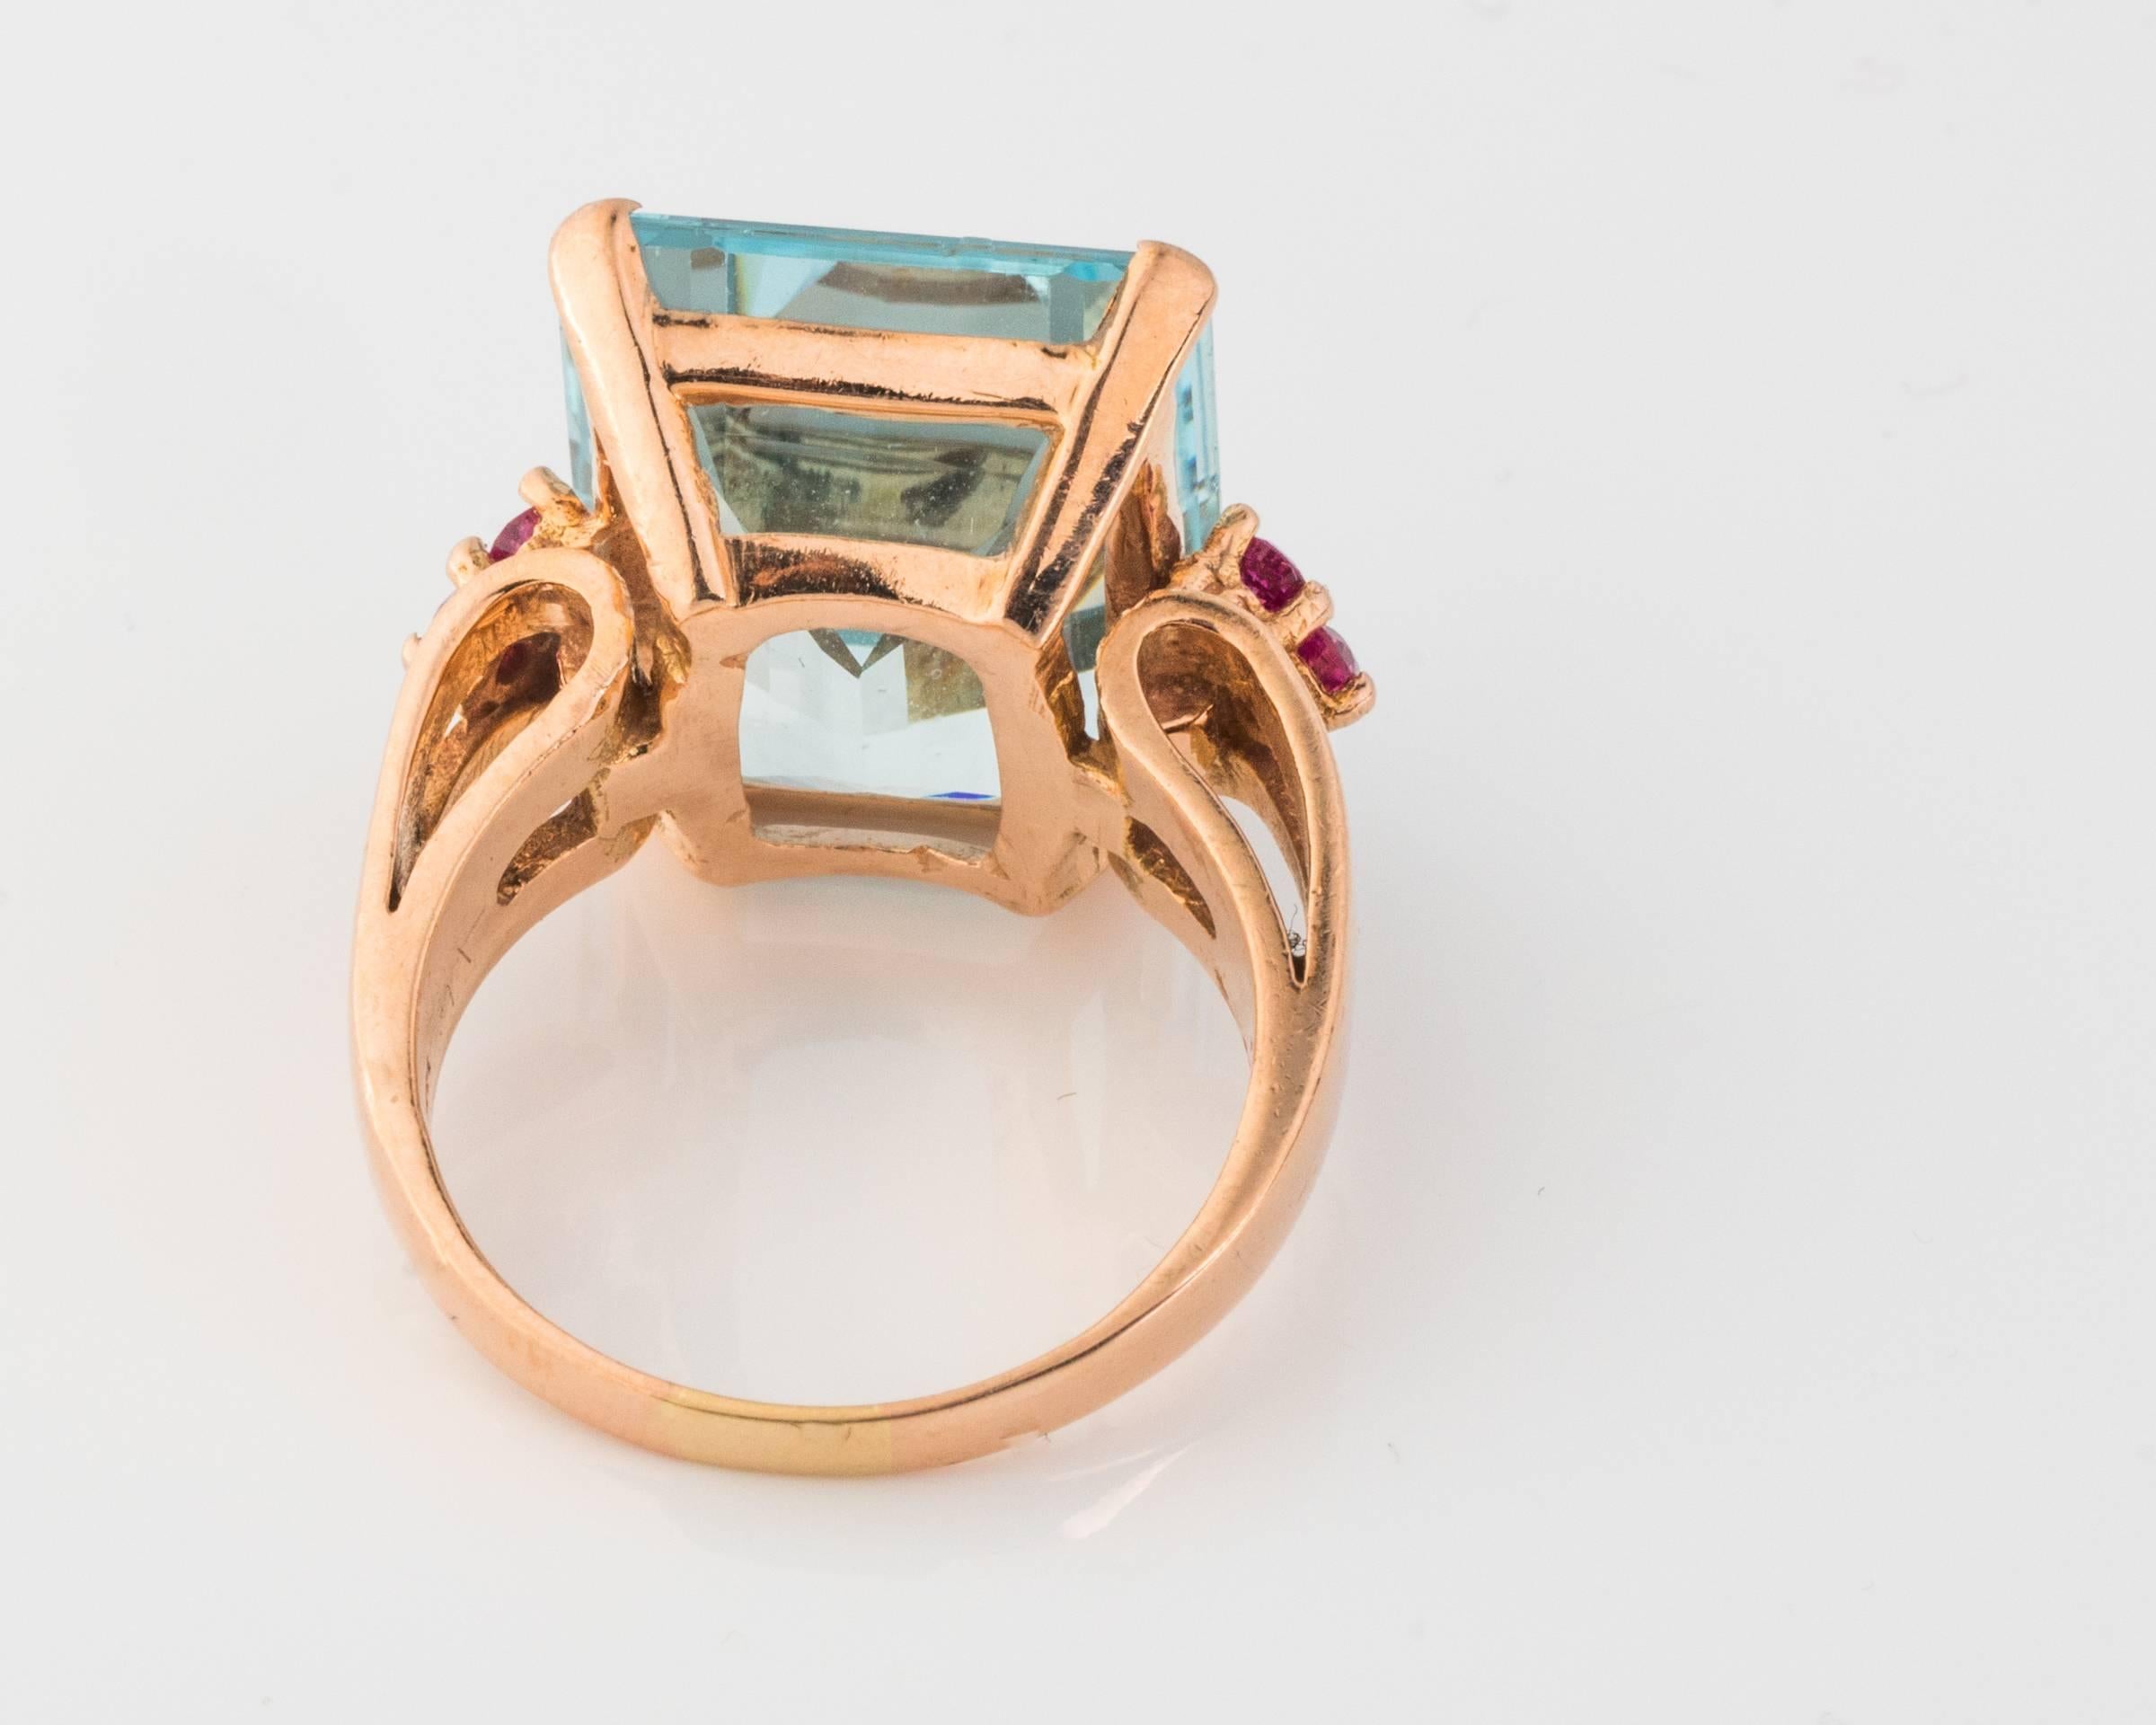 Retro Vintage 14kt Rose Gold Ring ft. Ornate Step-Cut Aquamarine. 

The gemstone measures 18.5mm x 14.5mm and approximately 10 carats in size. Flanked by six round brilliant simulated rubies. The color play between soft blues of the aquamarine and